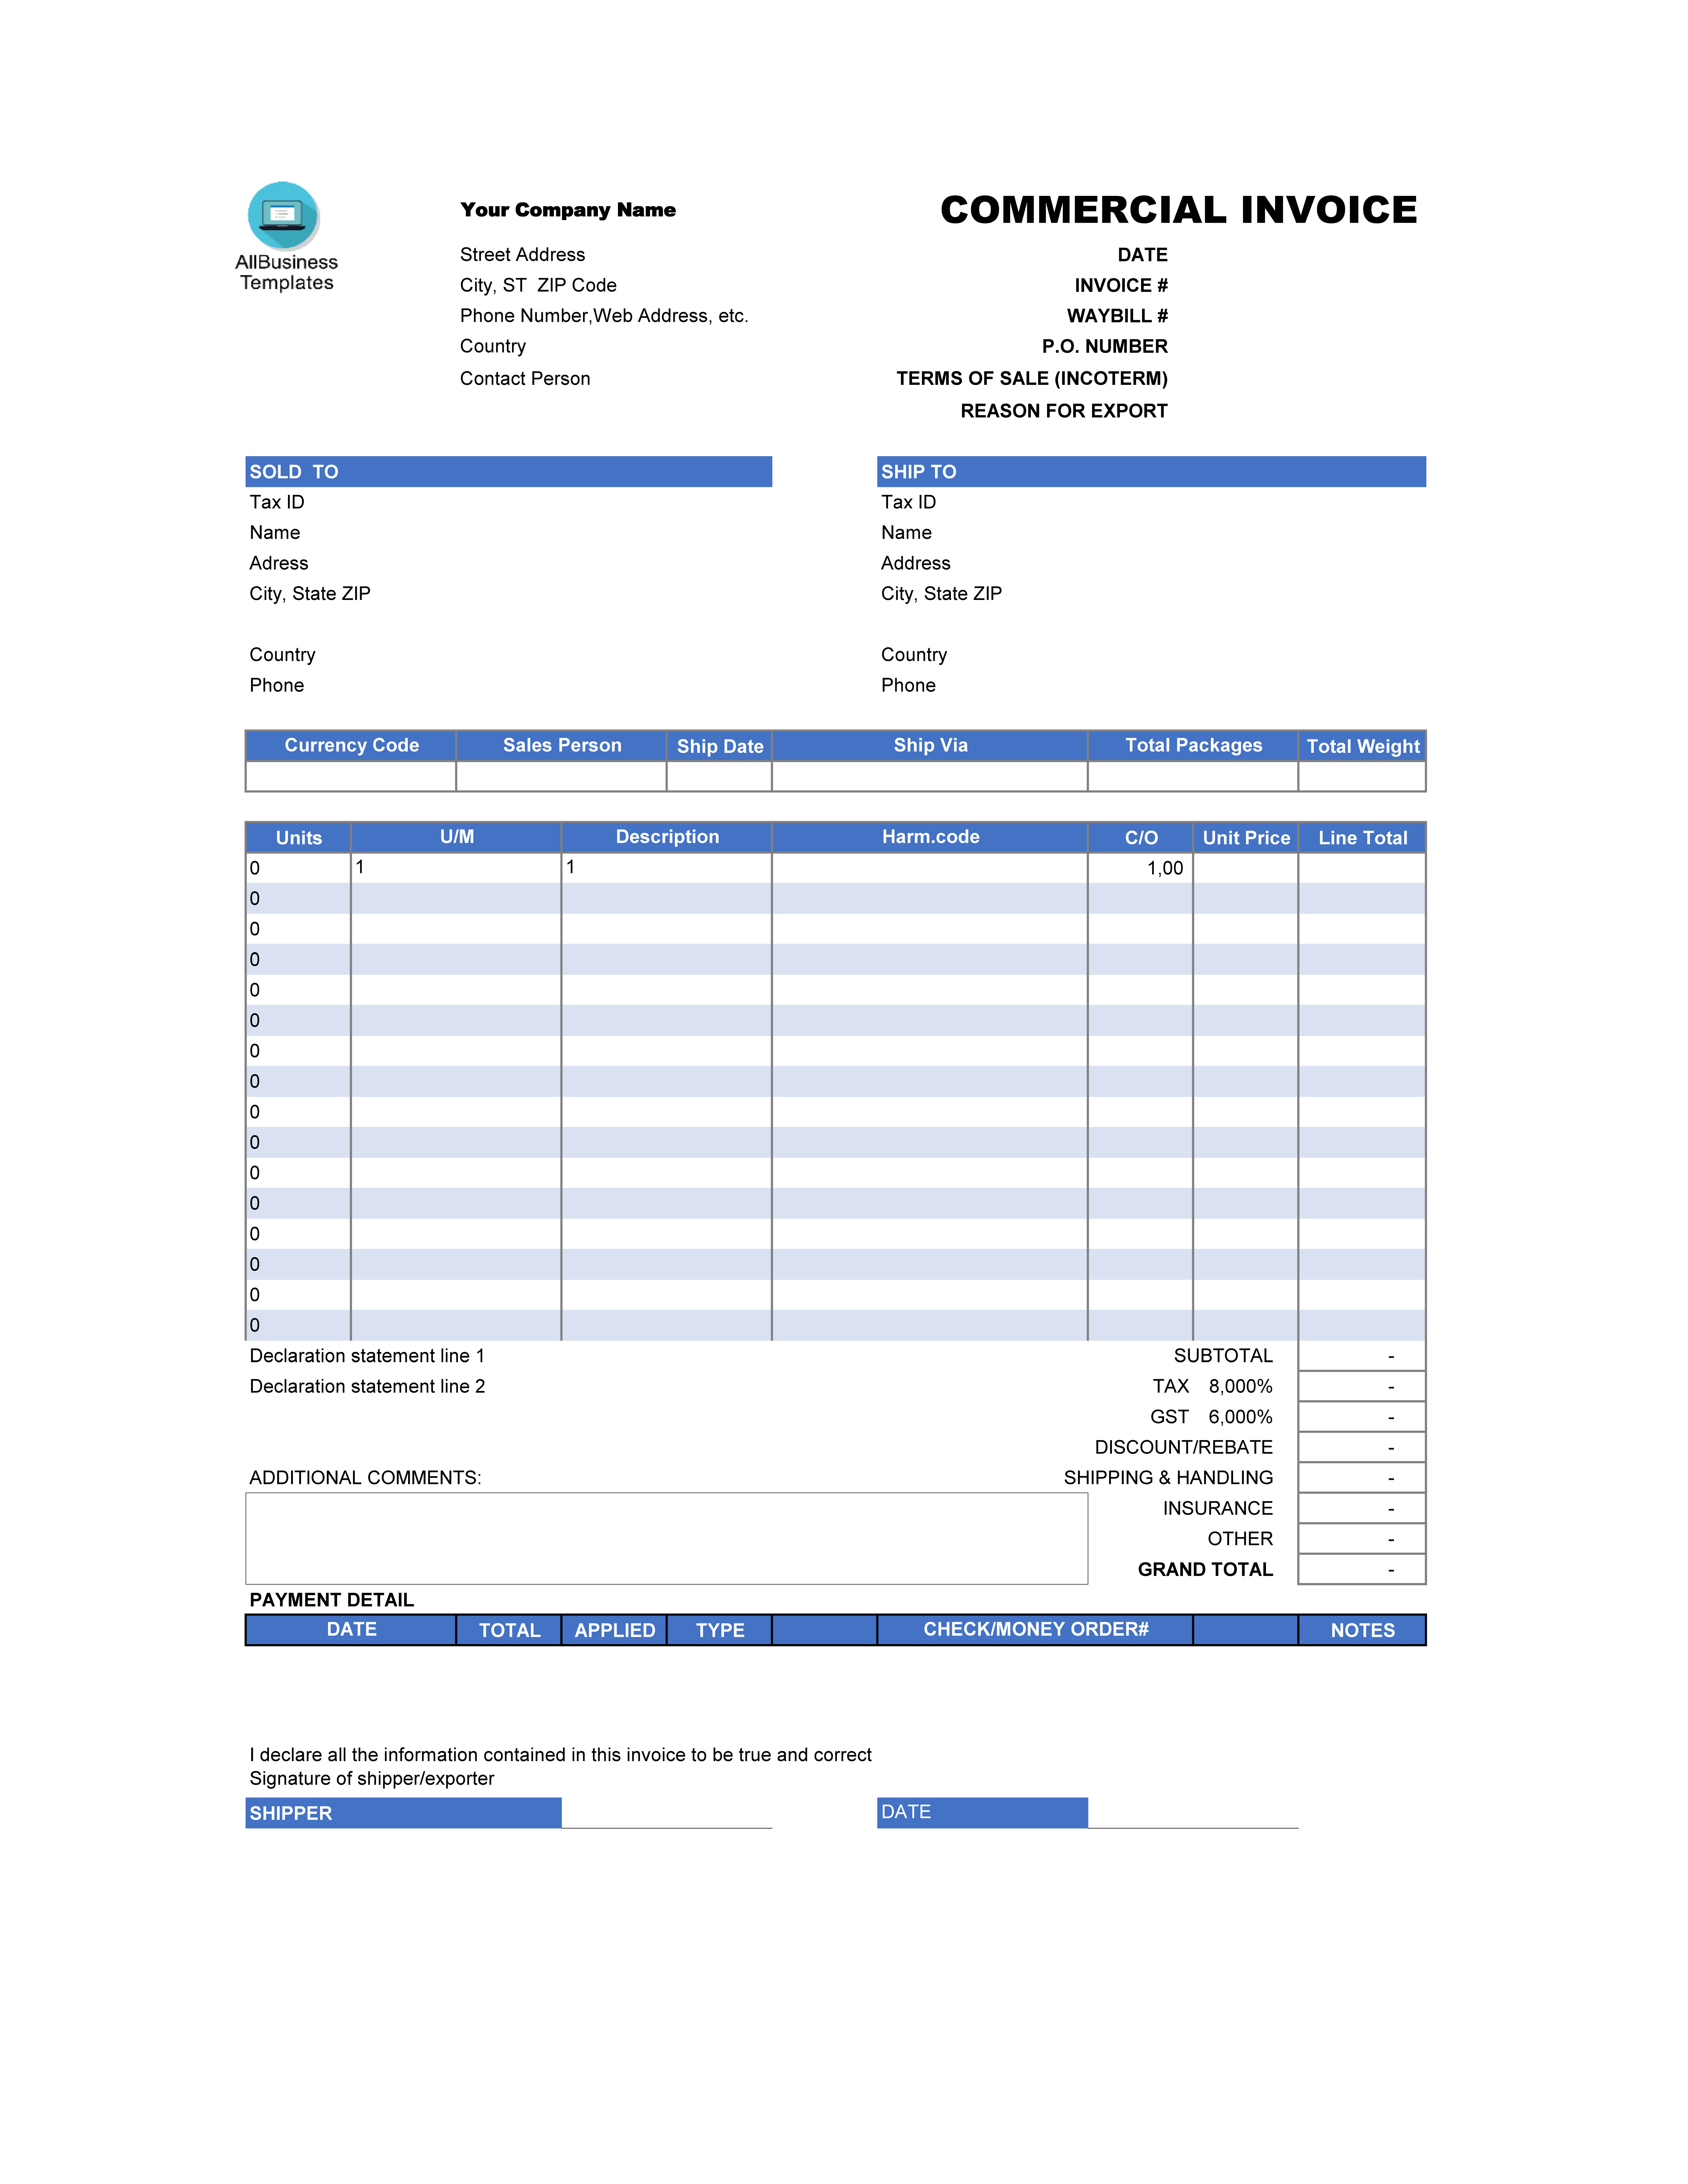 Commercial Invoice Excel 模板